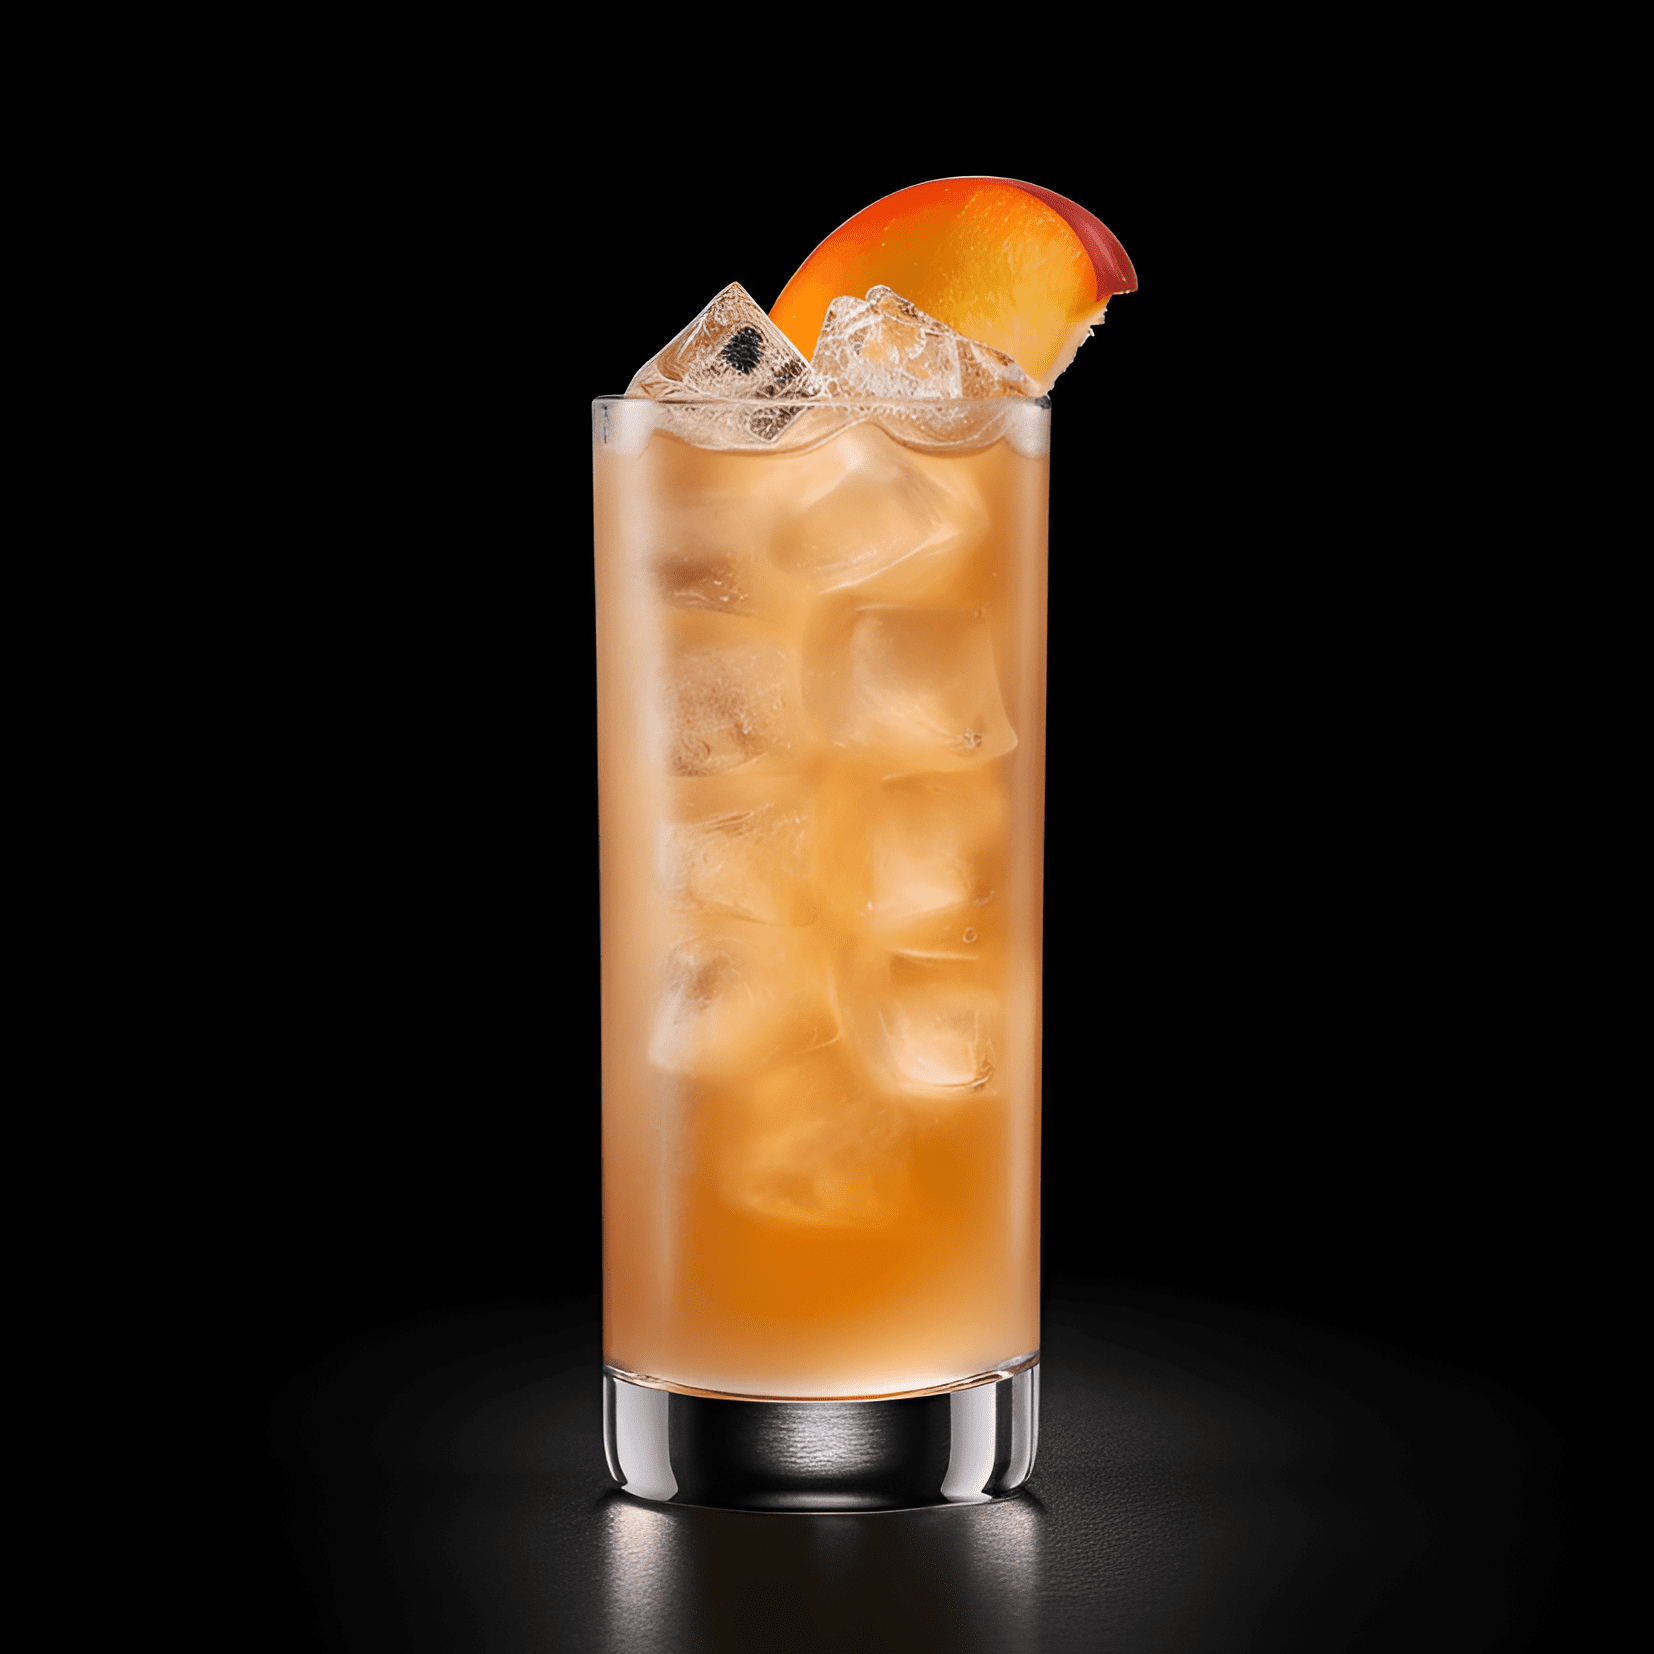 Peach Fuzz Cocktail Recipe - The Peach Fuzz cocktail has a sweet and fruity taste, with a hint of tartness from the lime juice. It is a well-balanced drink that is both refreshing and satisfying.